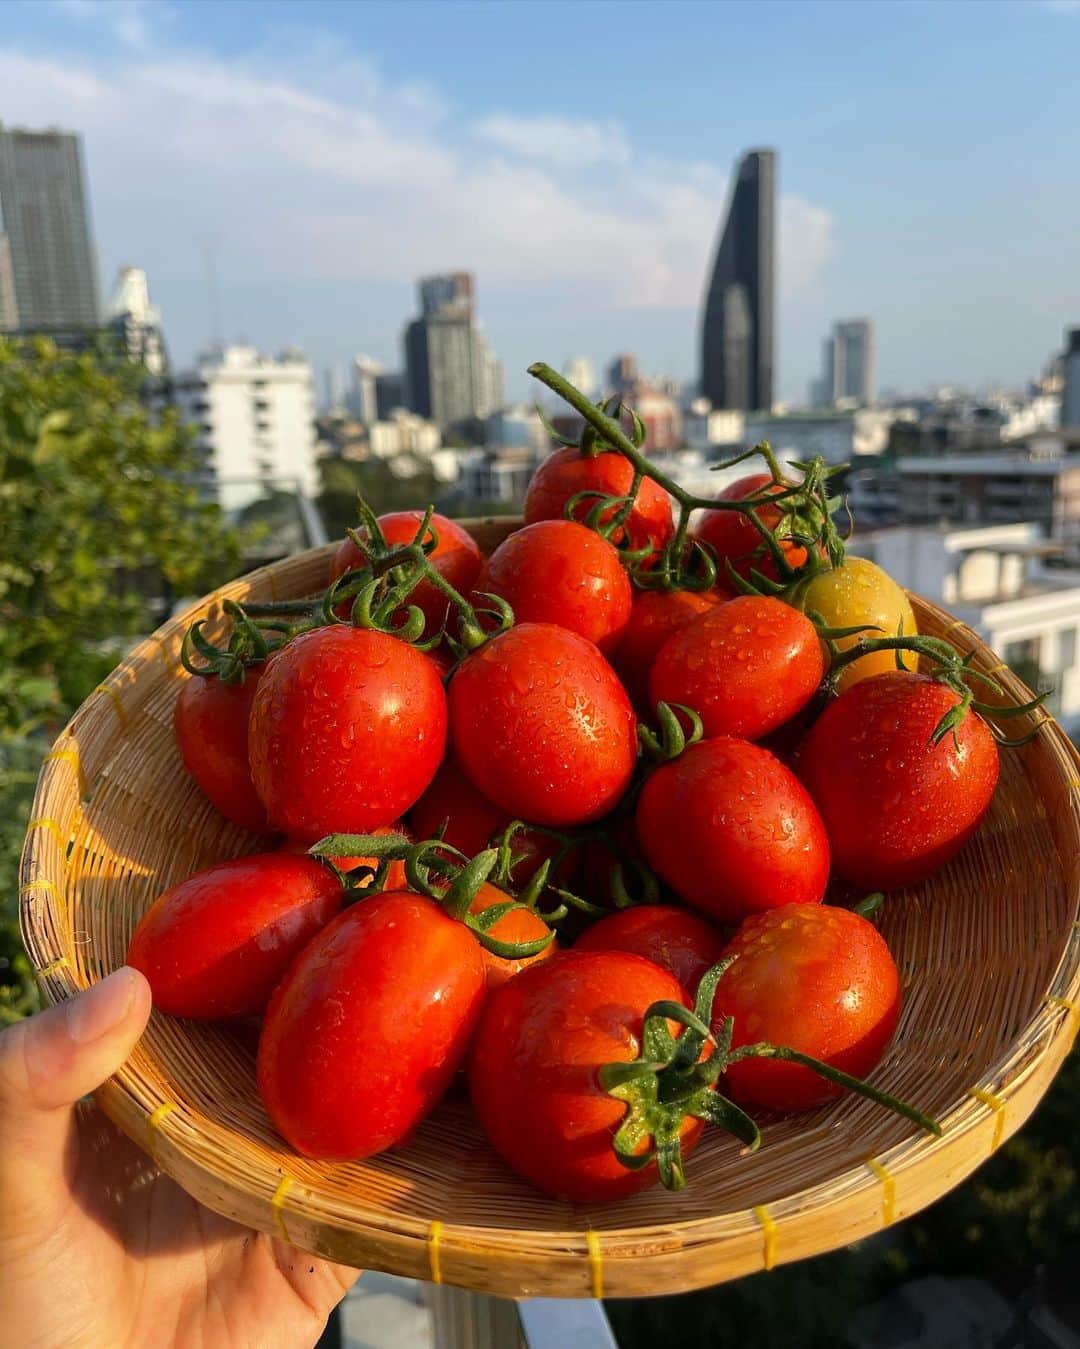 Amata Chittaseneeのインスタグラム：「Saying goodbye to #April as the hottest month in Thailand is finally coming to an end 😄 Harvested the last of my rooftop’s tomatoes & carrots and enjoying my Summer fruits & vegetables underneath the heating sun 🌽🥕🍉🍈 #urbanfarming #rooftopgarden #bangkok #thailand #organicfood #rawfood #สวนผักคนเมือง #pearypieskygarden」